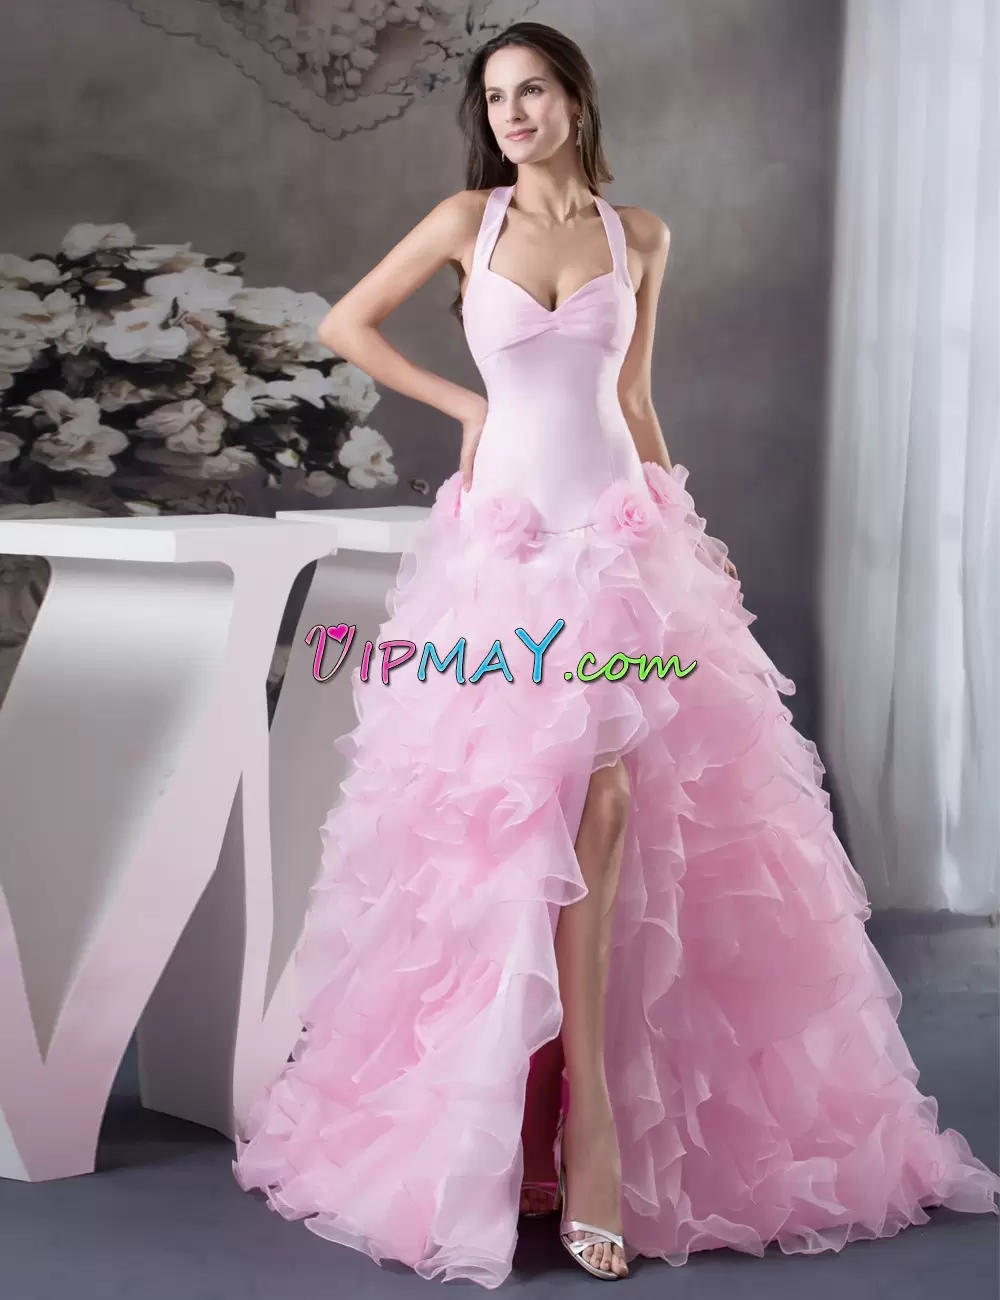 Sleeveless Organza With Train Sweep Train Lace Up Junior Homecoming Dress in Pink with Ruffles